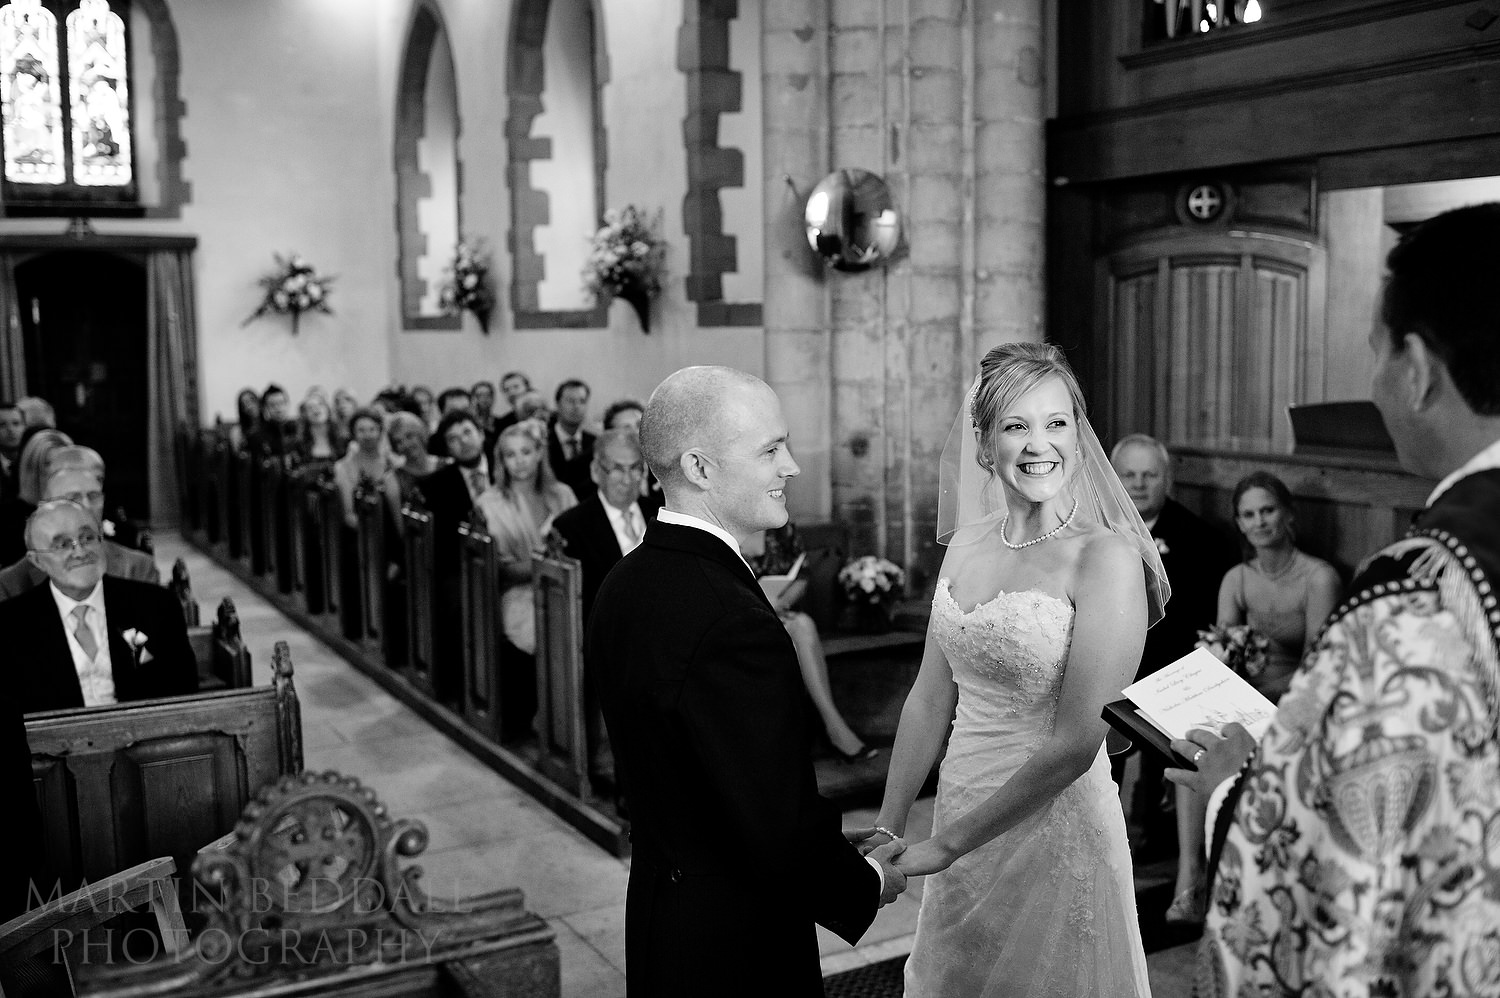 Wedding ceremony at Ditchling church